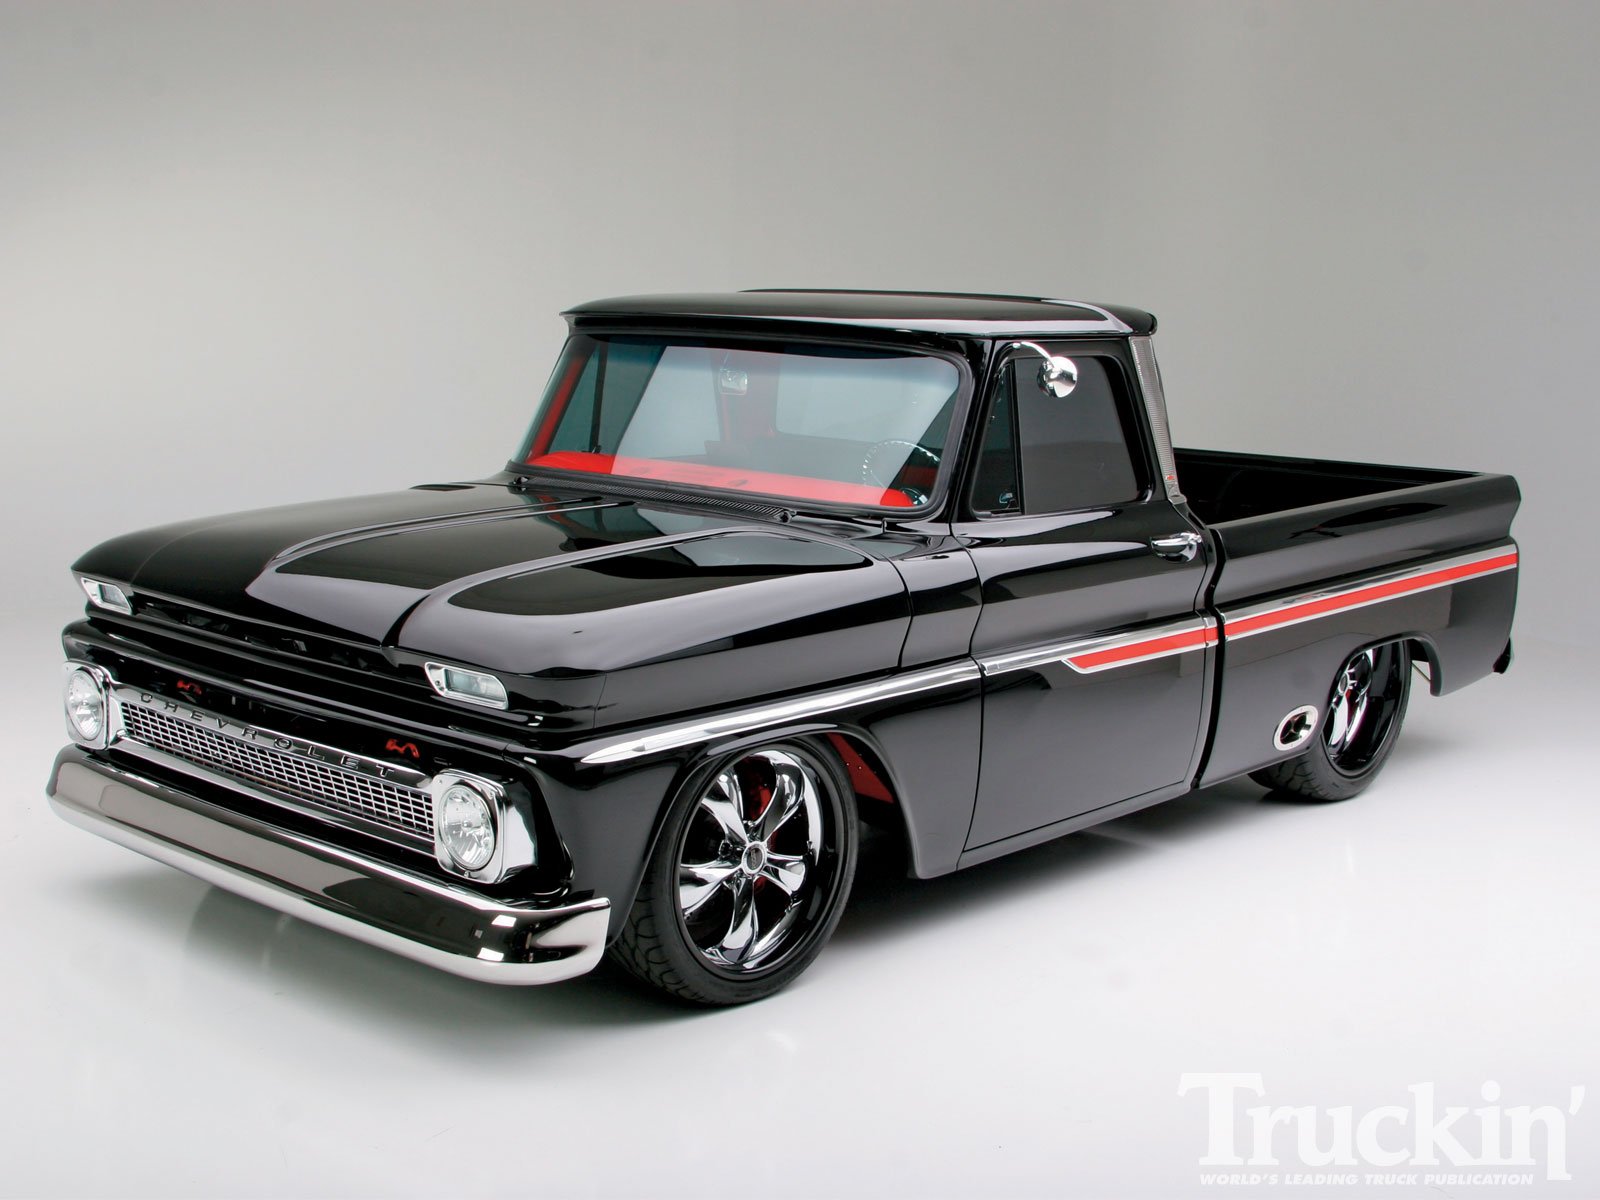  download Chevy Truck Wallpapers 5044 Hd Wallpapers in Cars 1600x1200